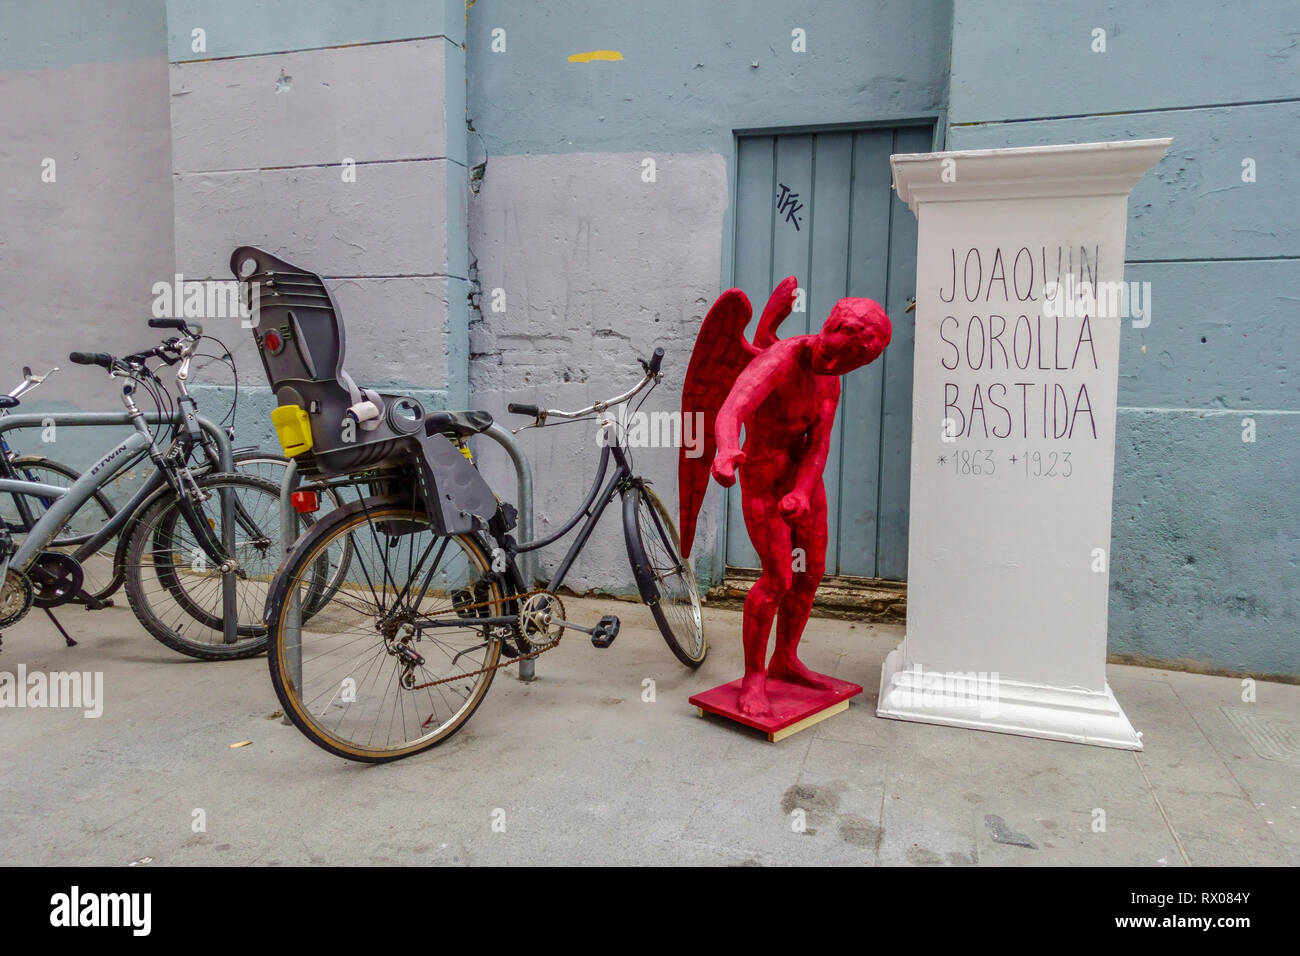 A red angel standing next to a bicycle in the street, Preparation for the festival Las Fallas, Valencia, Old Town, El Carmen district Stock Photo